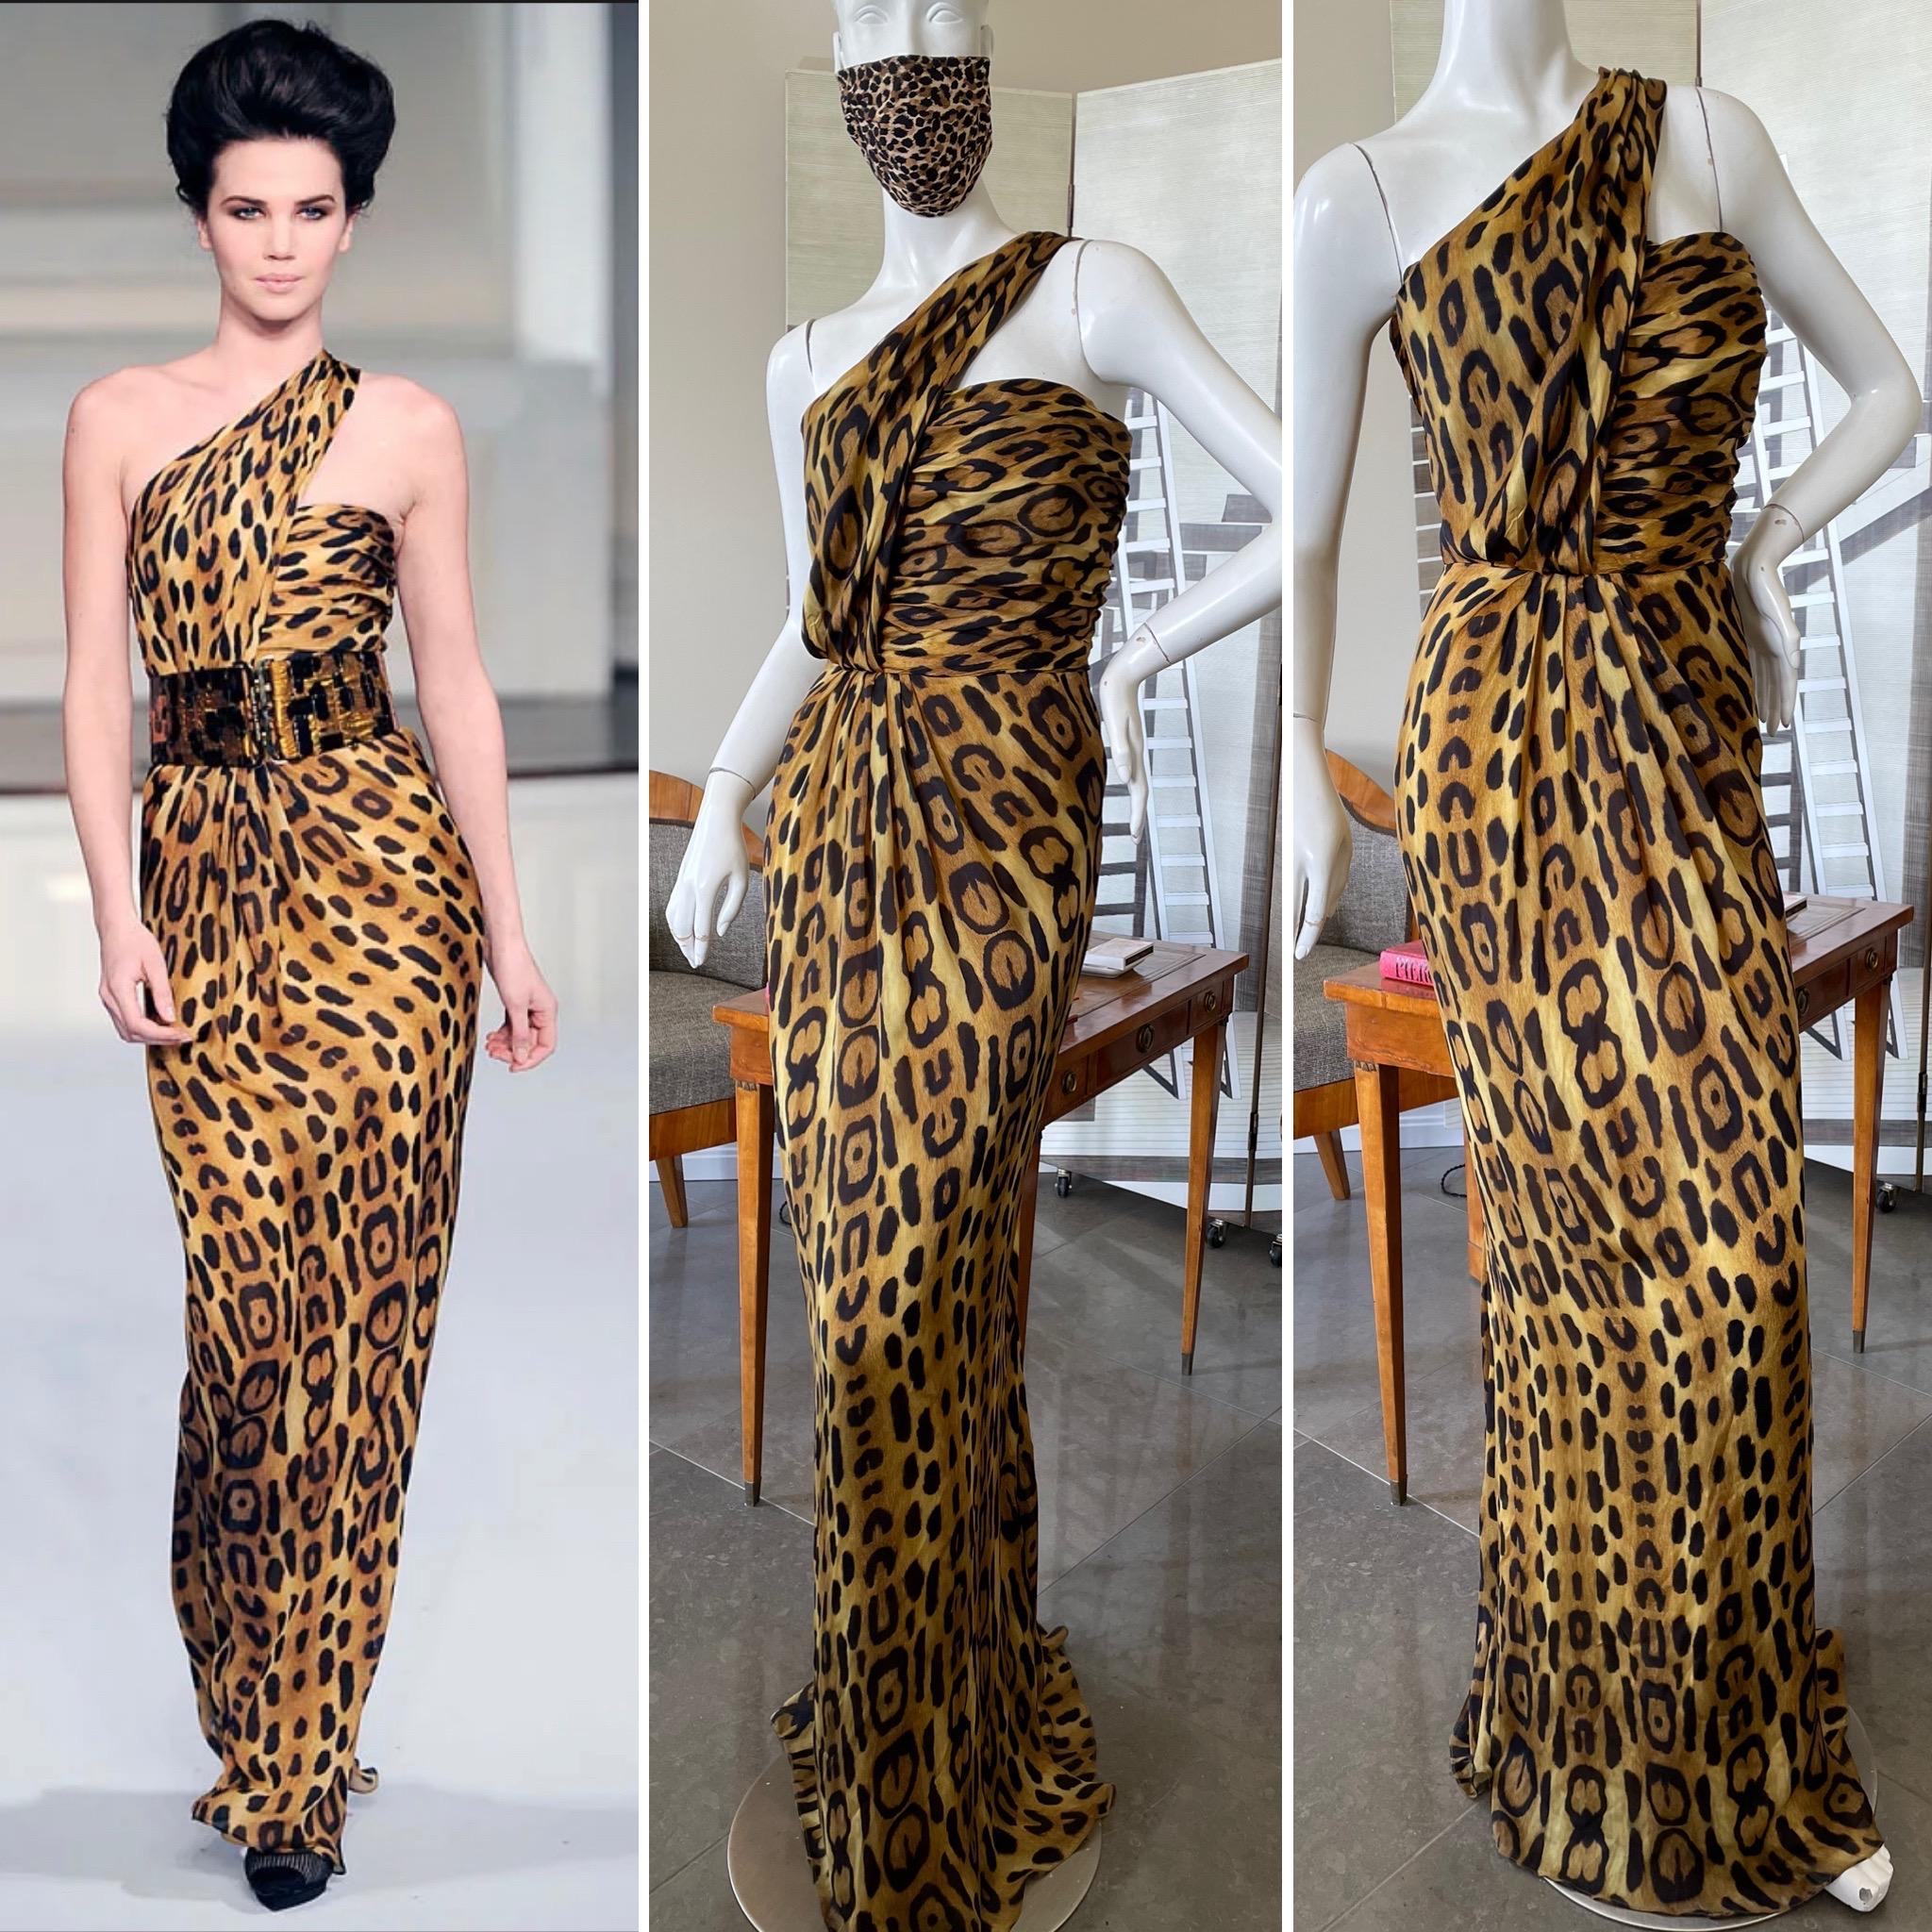 Oscar de la Renta Elegant One Shoulder Silk Leopard Print Dress .
There is a full inner corset.
Stunning. Please use the zoom feature to see all the remarkable details.
 Size 6
Bust 36